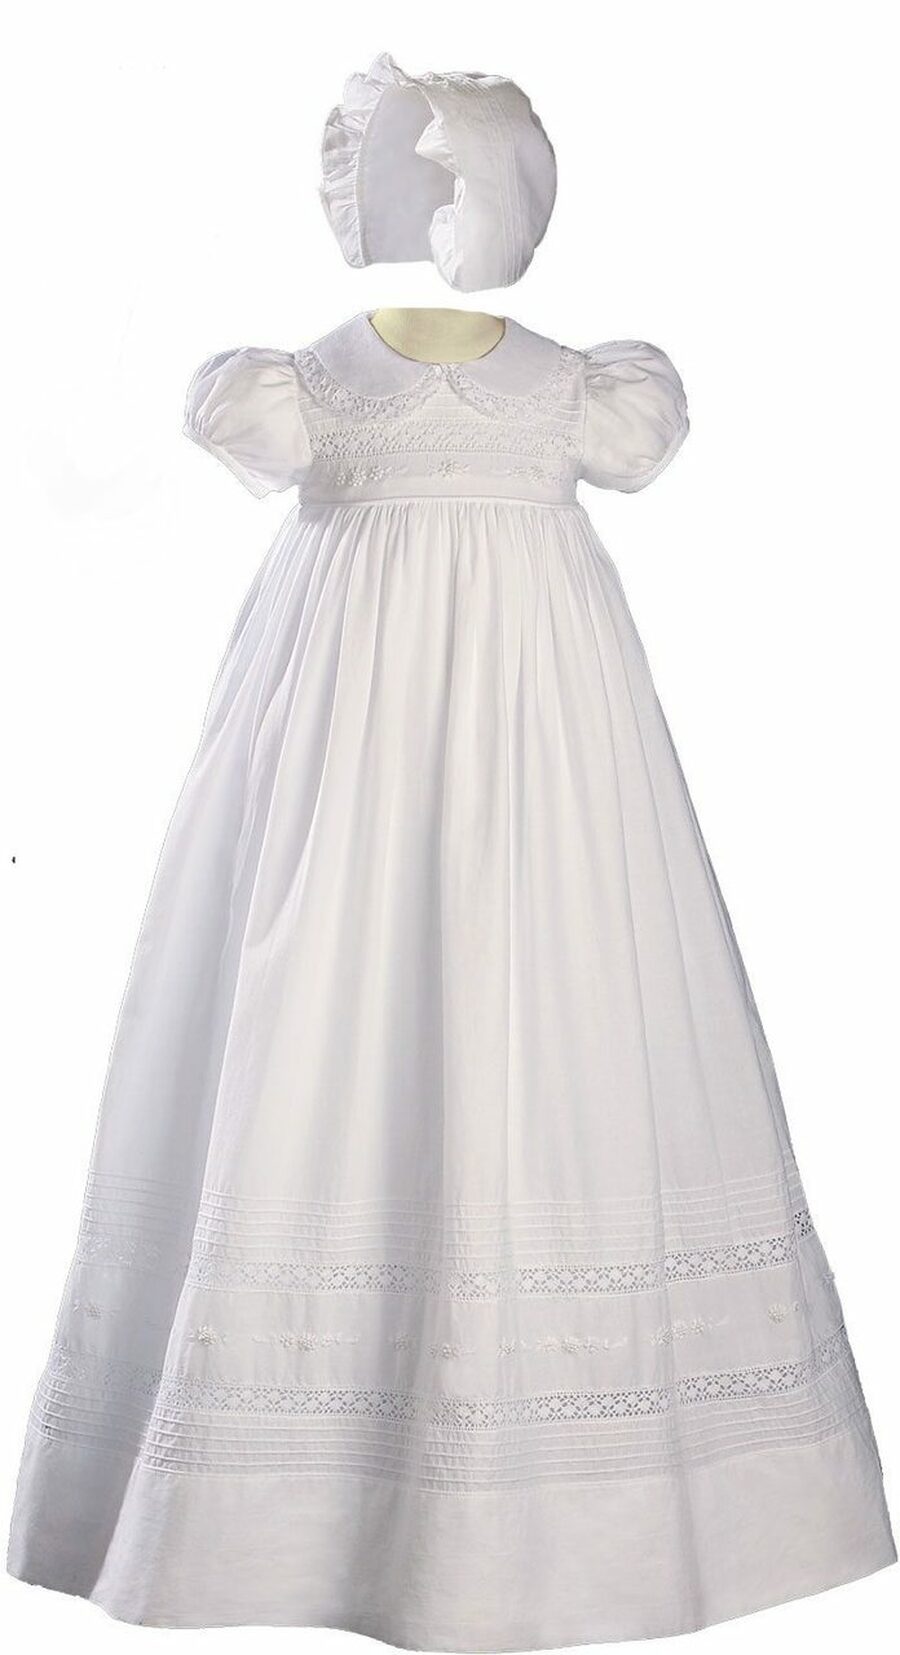 Twin Christening Gown